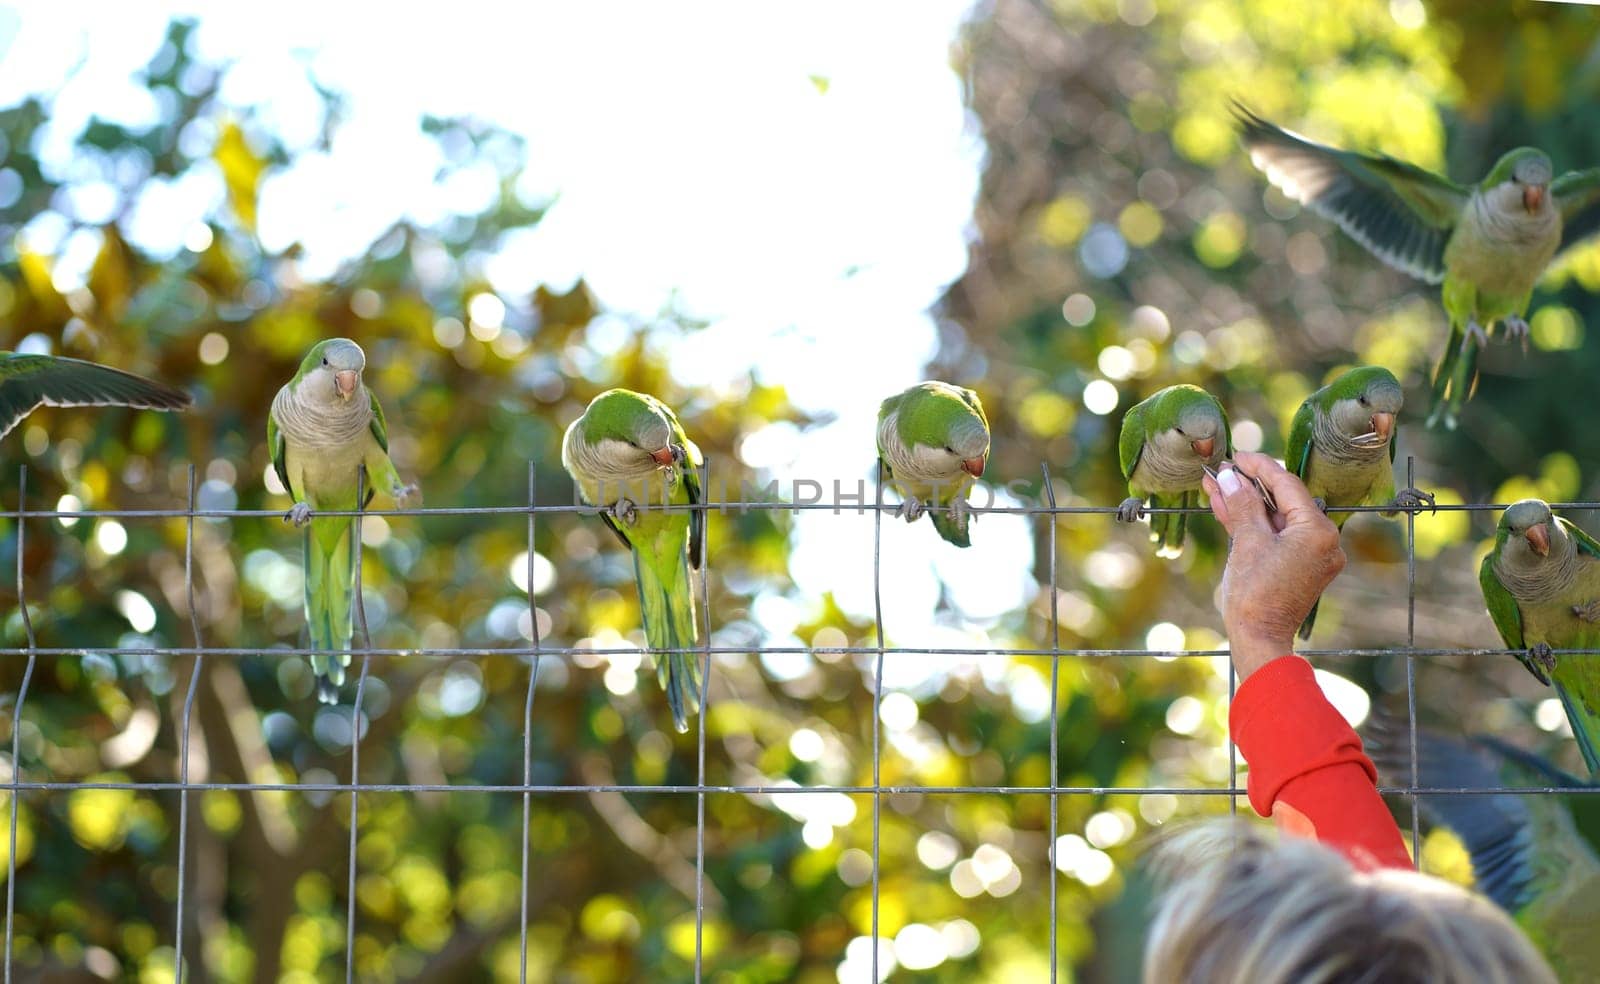 Barcelona. City Park. People feed parrots. Monk parakeet , Group of green parakeets on a chain-link fence and the hand of a person feeding them